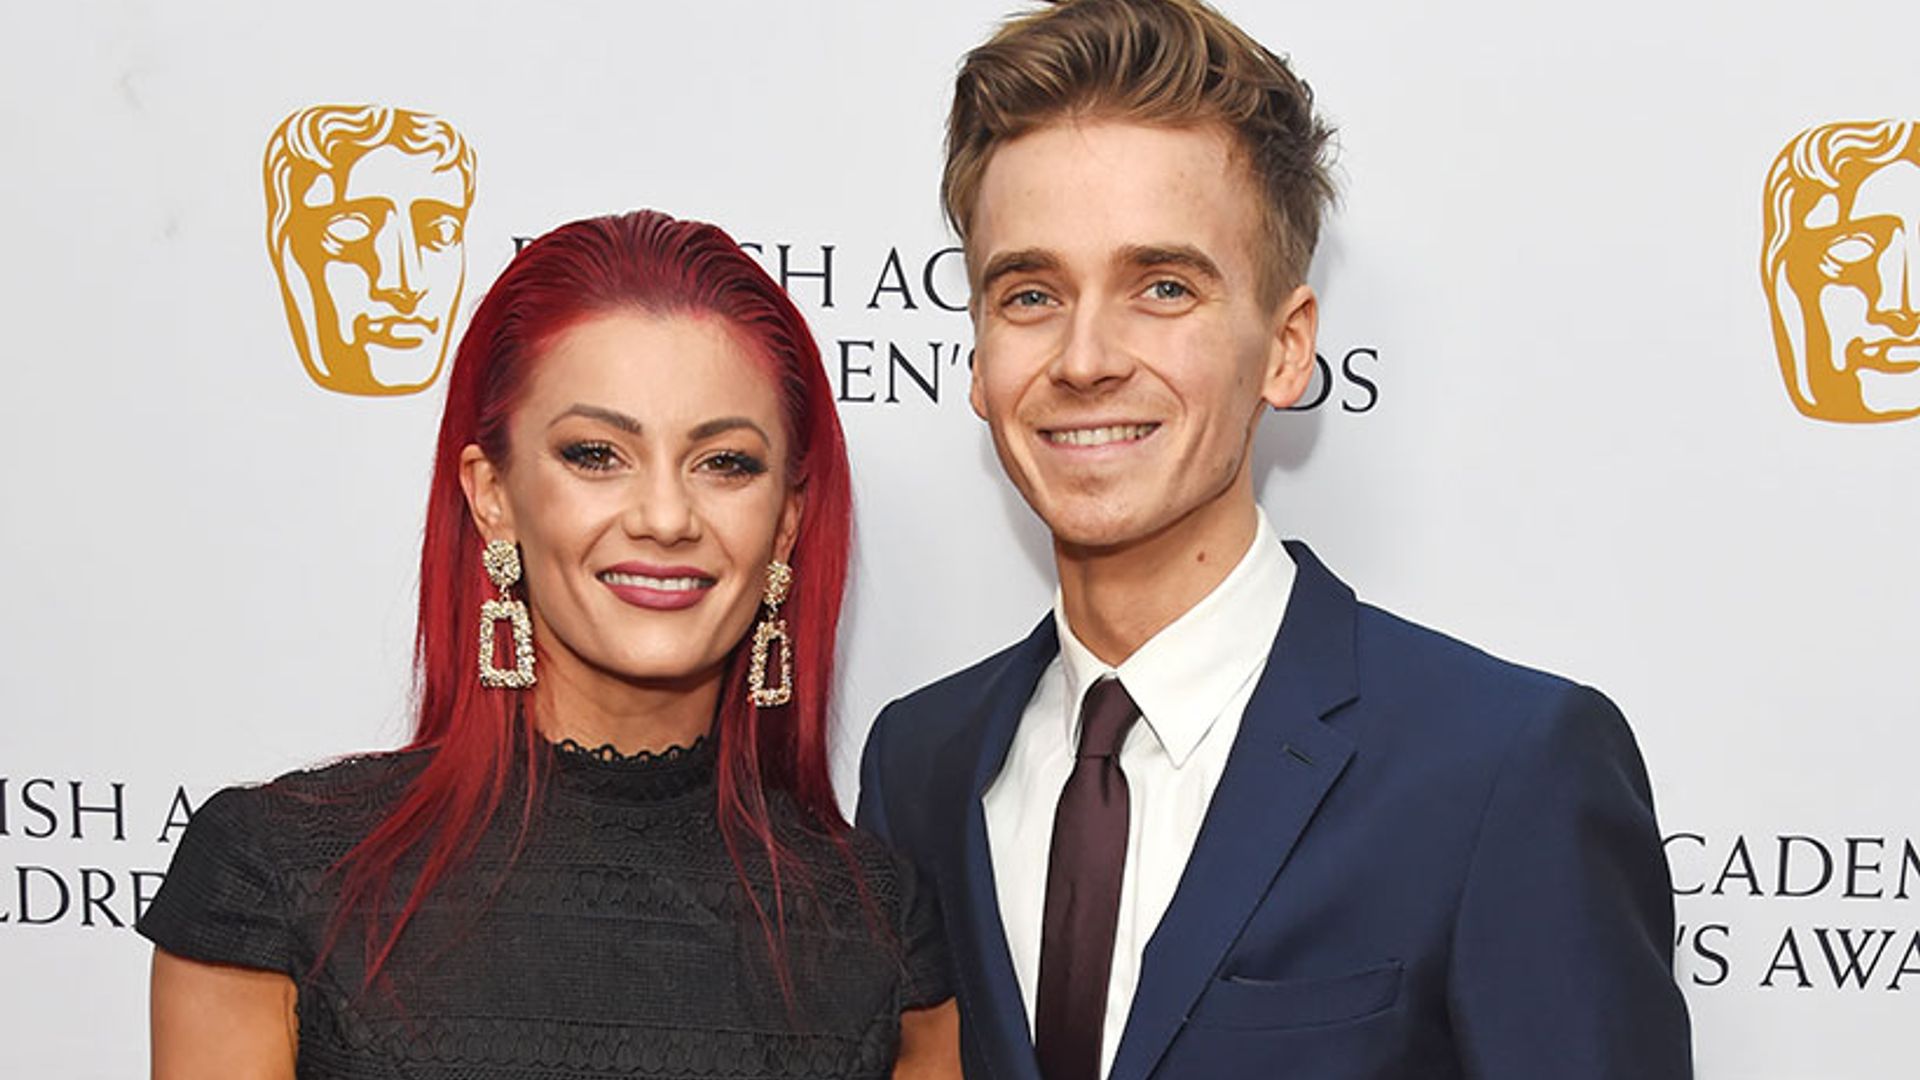 strictly come dancing joe sugg dianne buswell